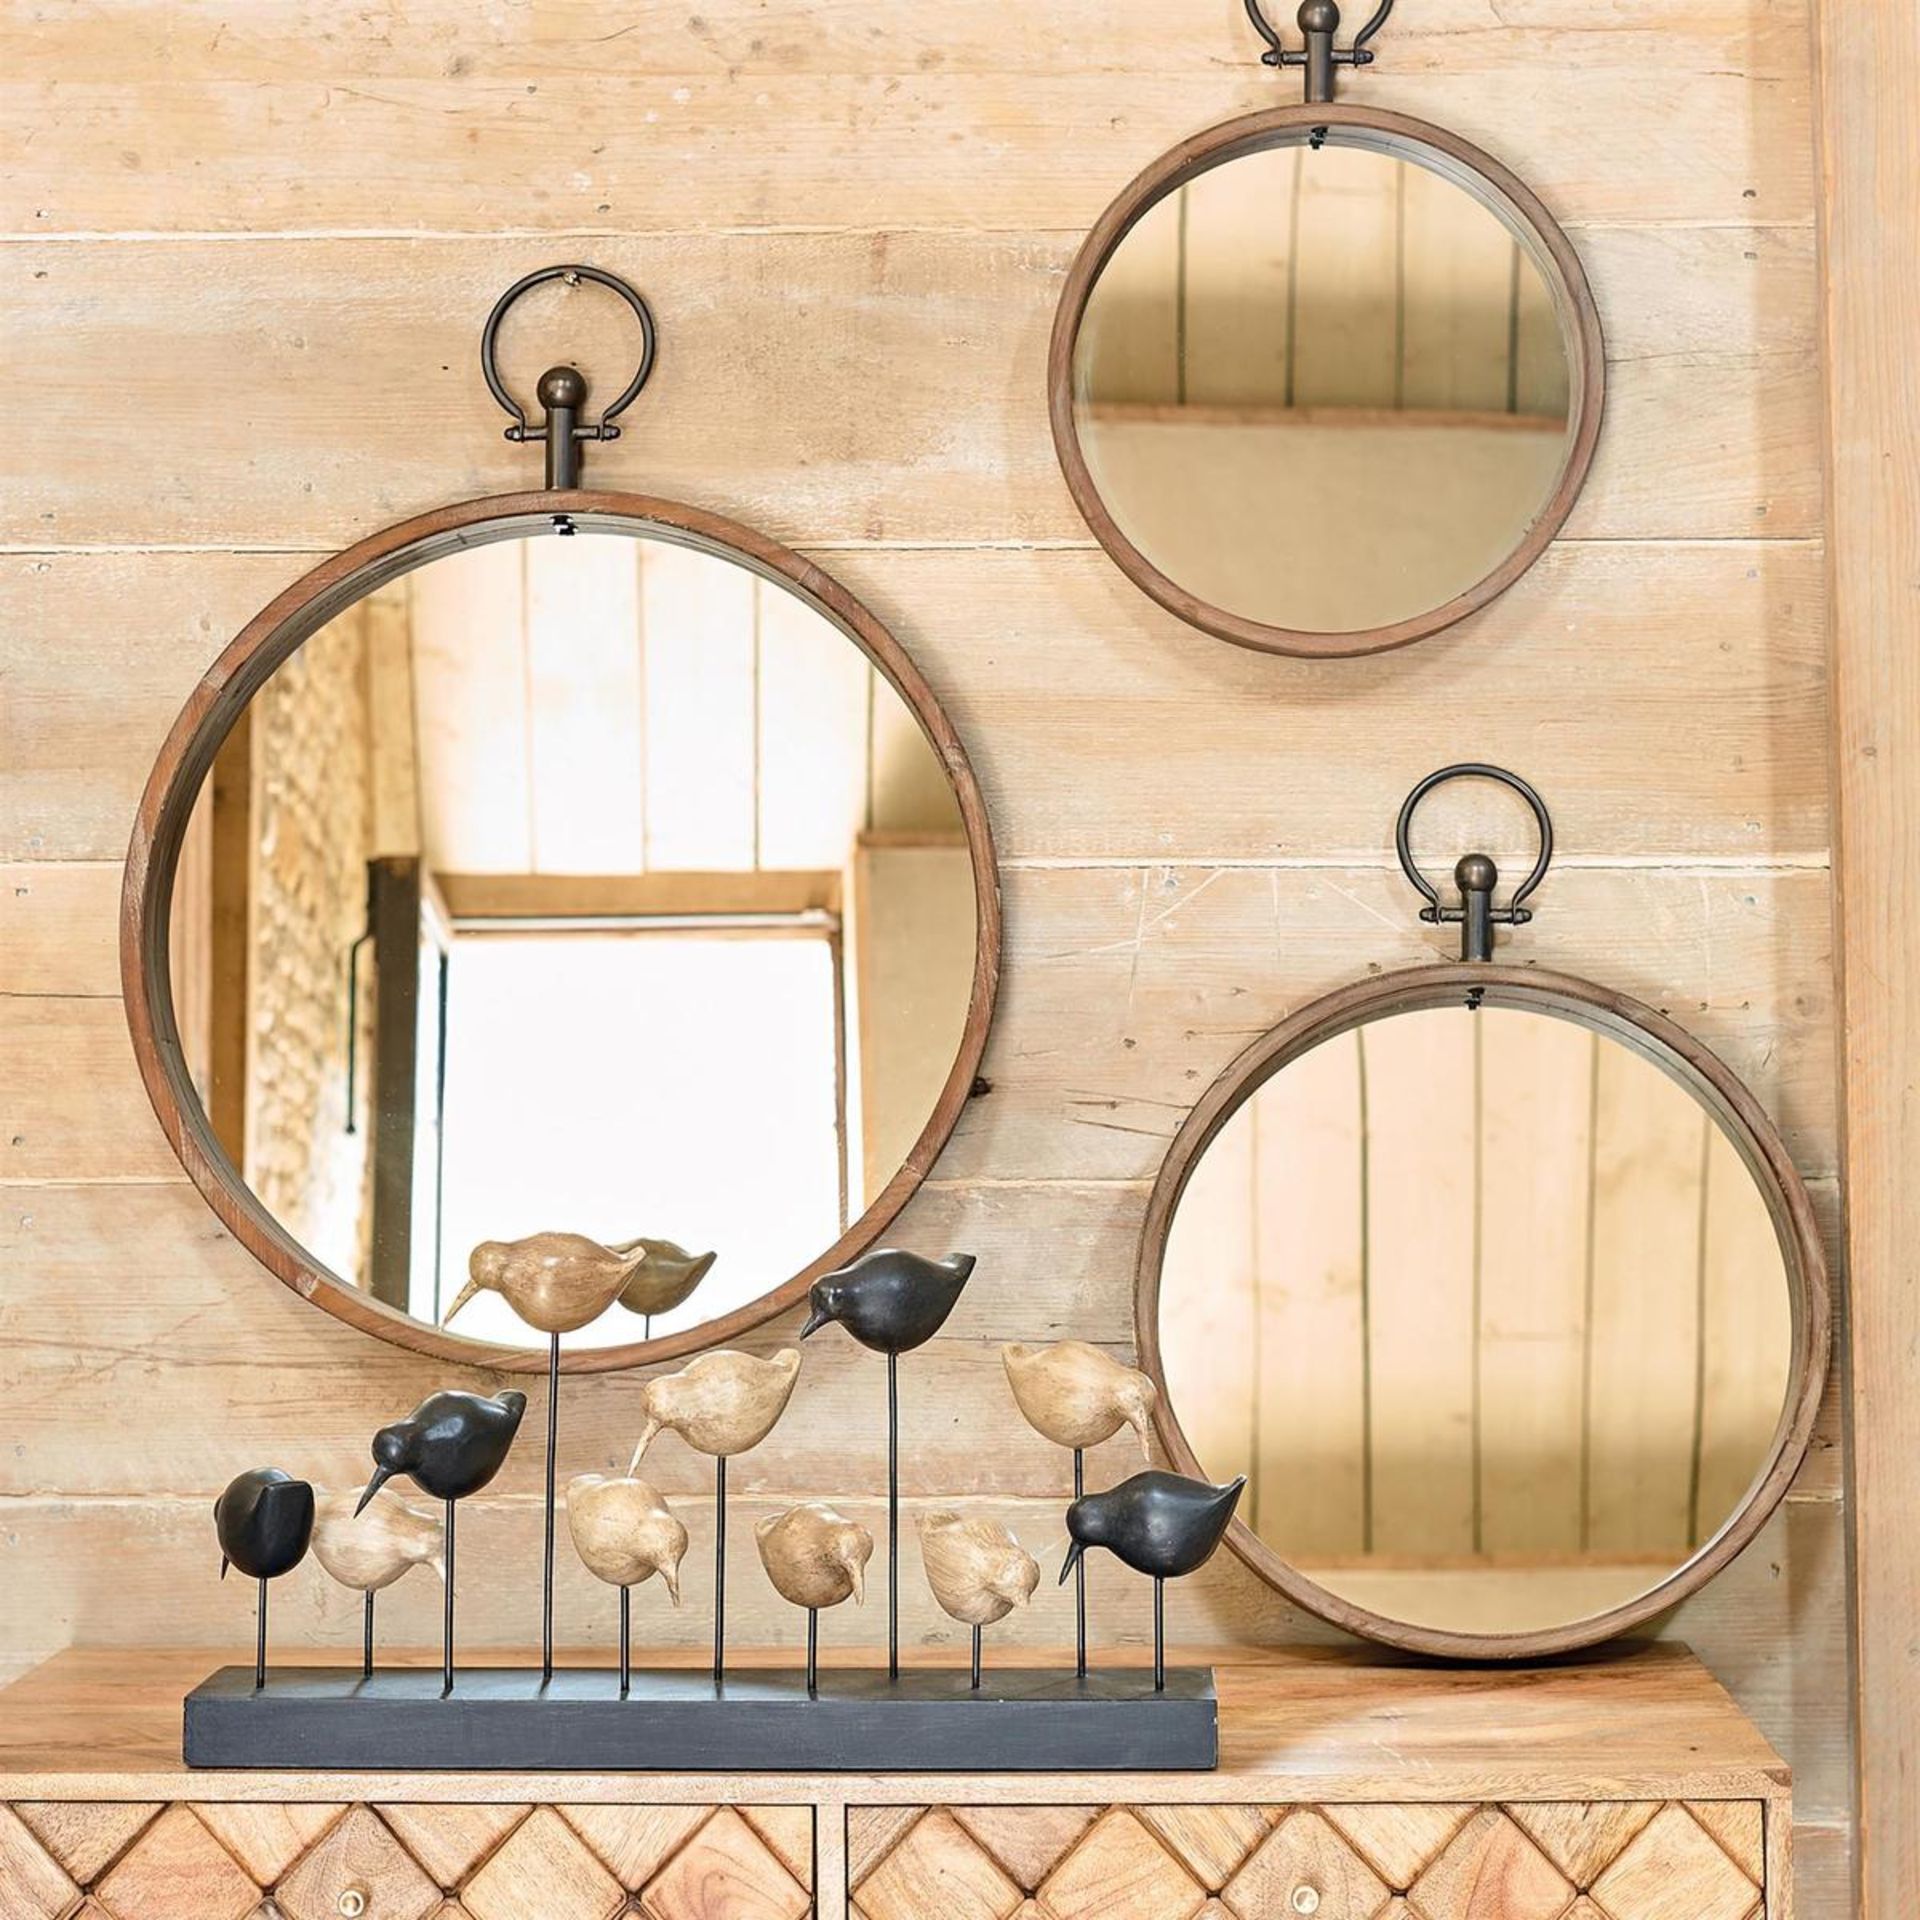 Parlane Compass Mirror Add New Depth And Light To Your Home And Hallways With This Stunning